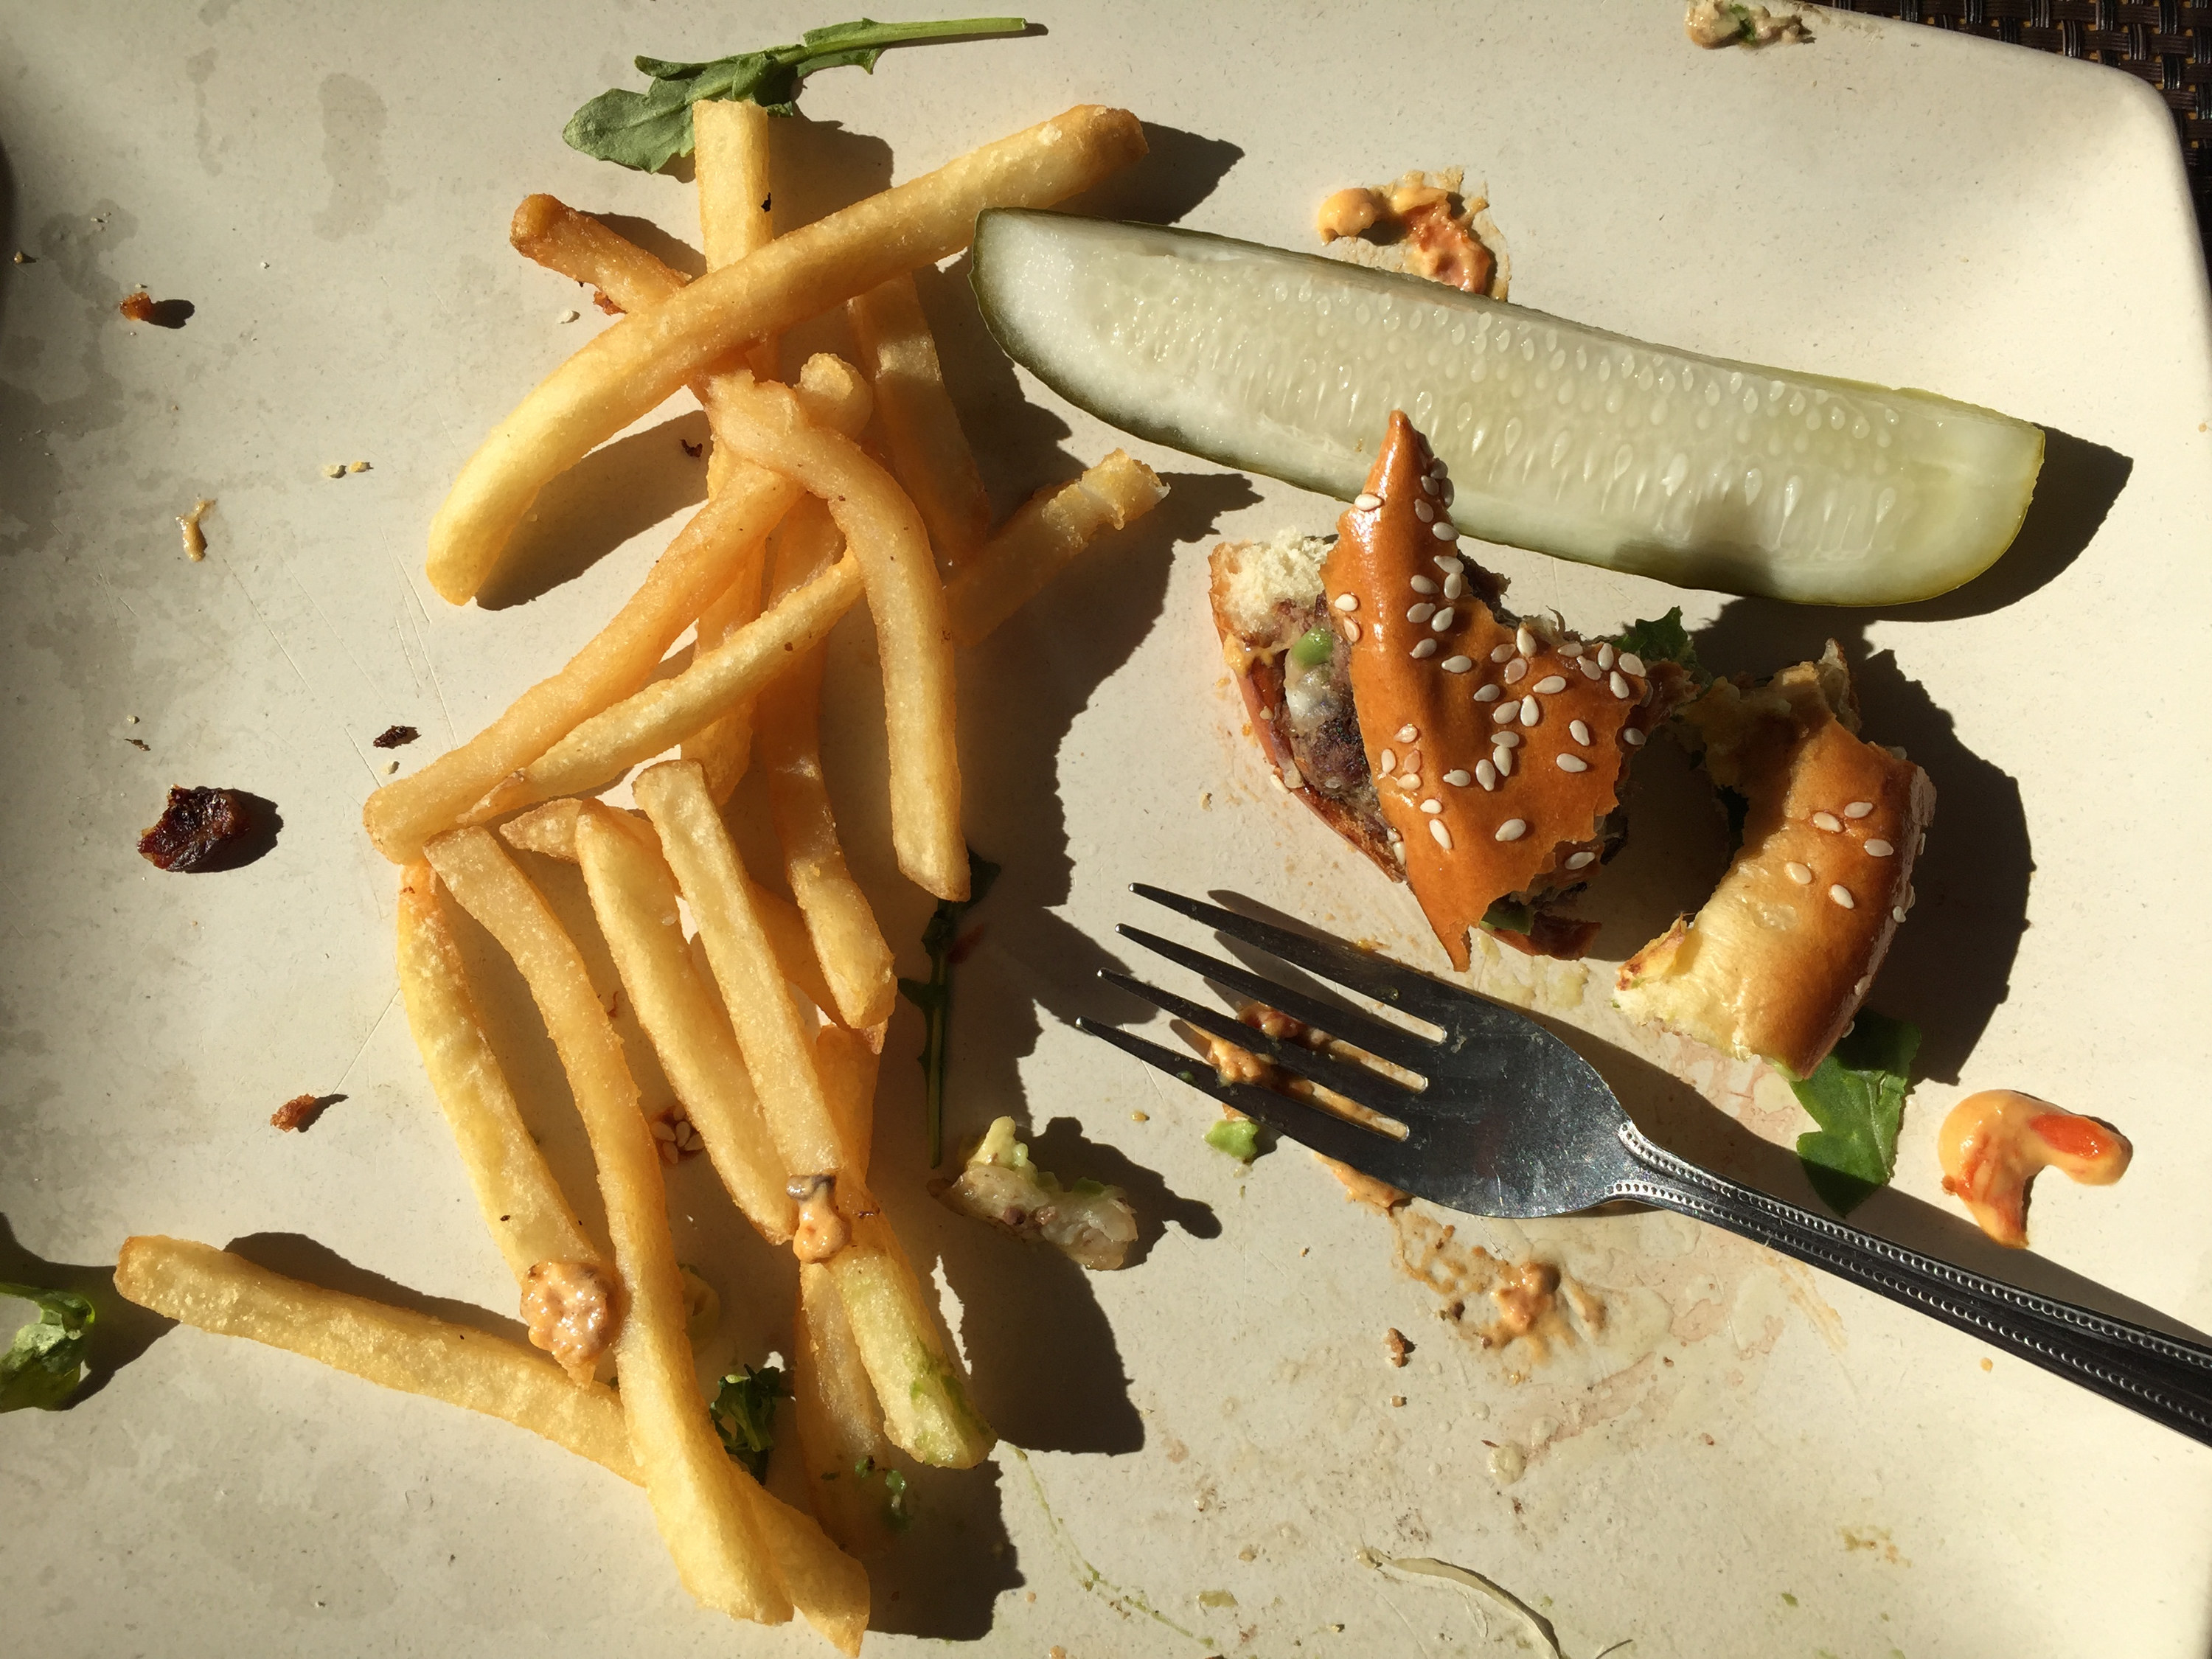 Remains of a meals of hamburger, french fries and pickle with fork.